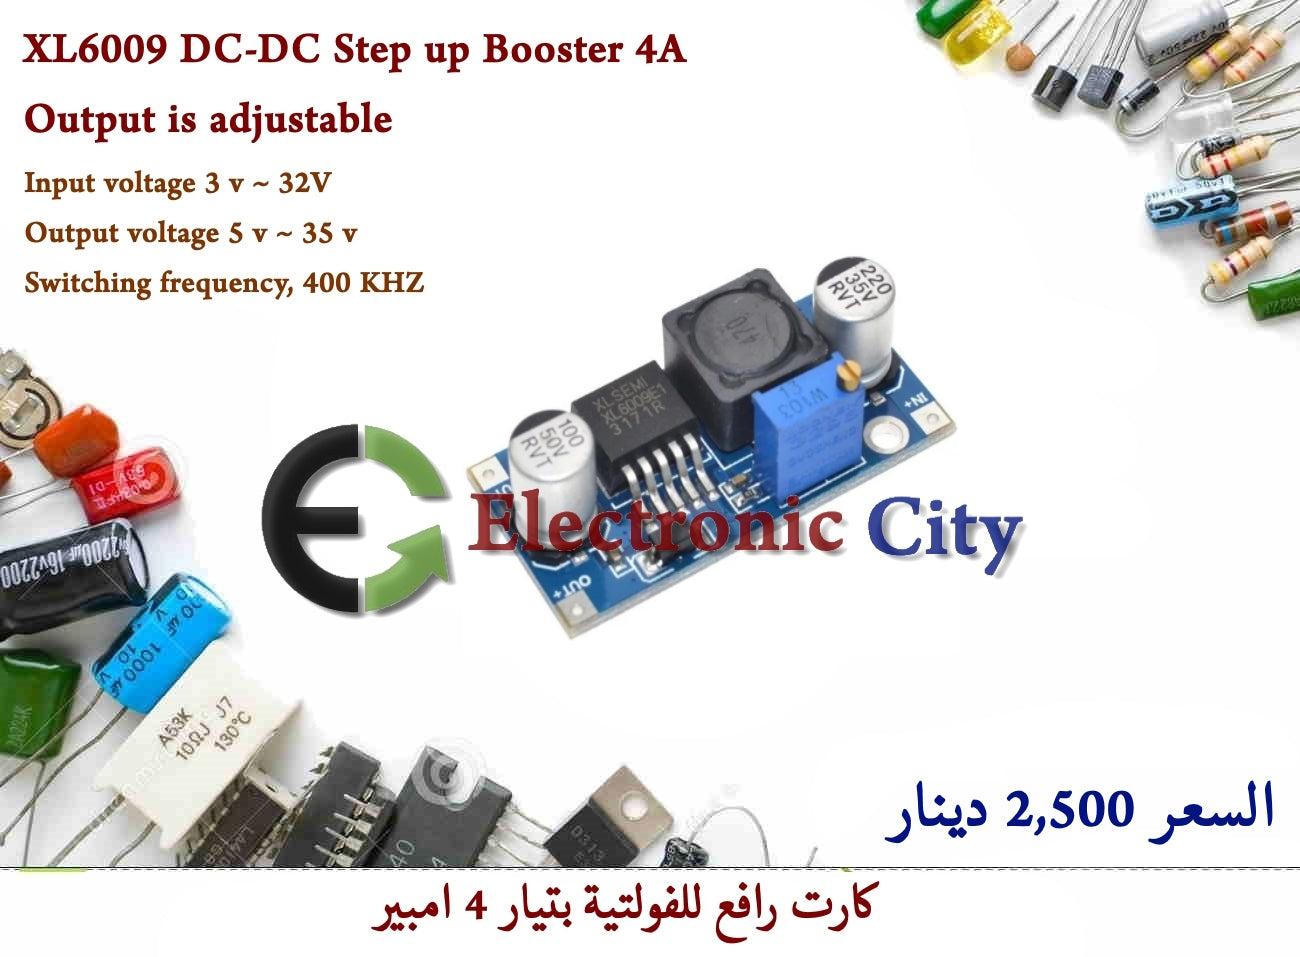 XL6009 DC-DC Booster Output is adjustable 4A current #G12 010044